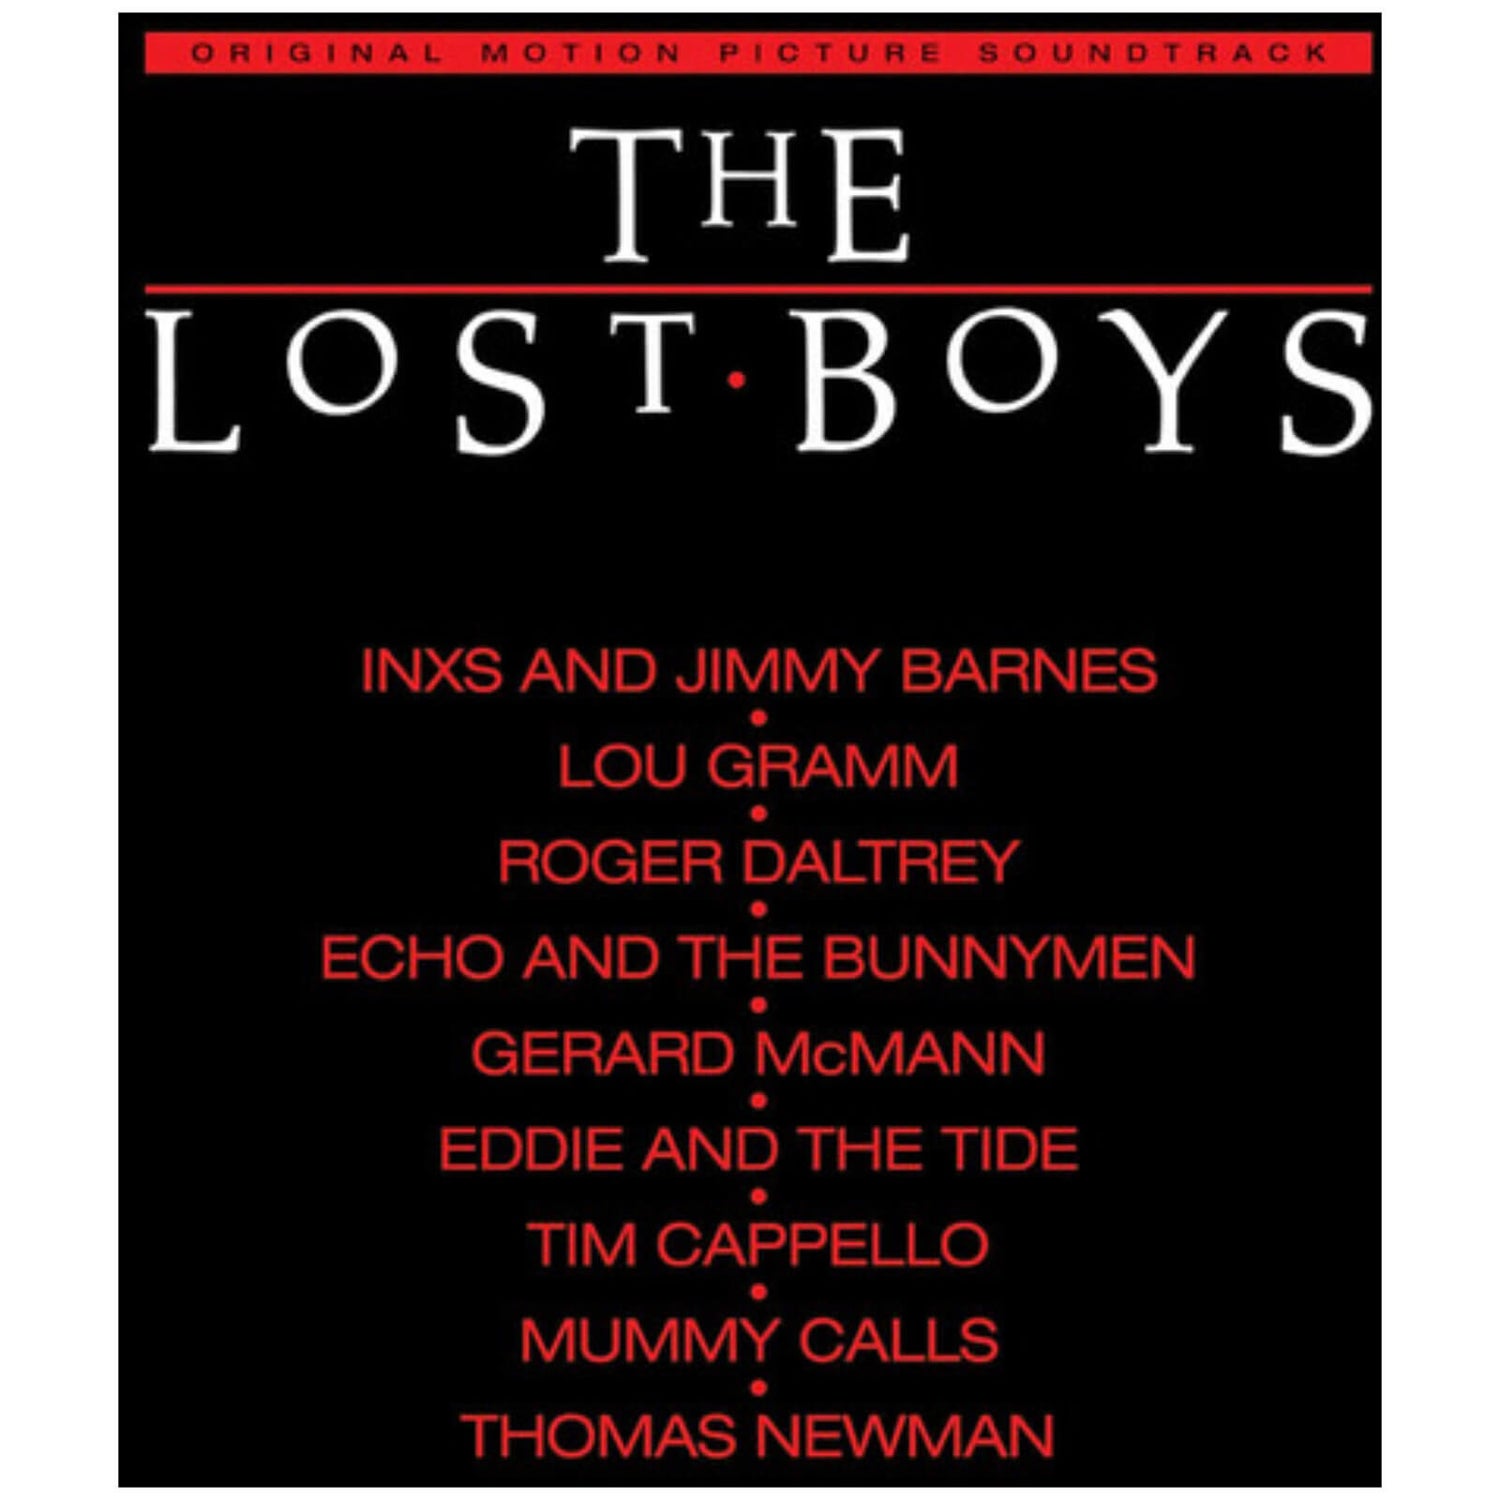 The Lost Boys (Original Motion Picture Soundtrack) 180g Vinyl (Red)